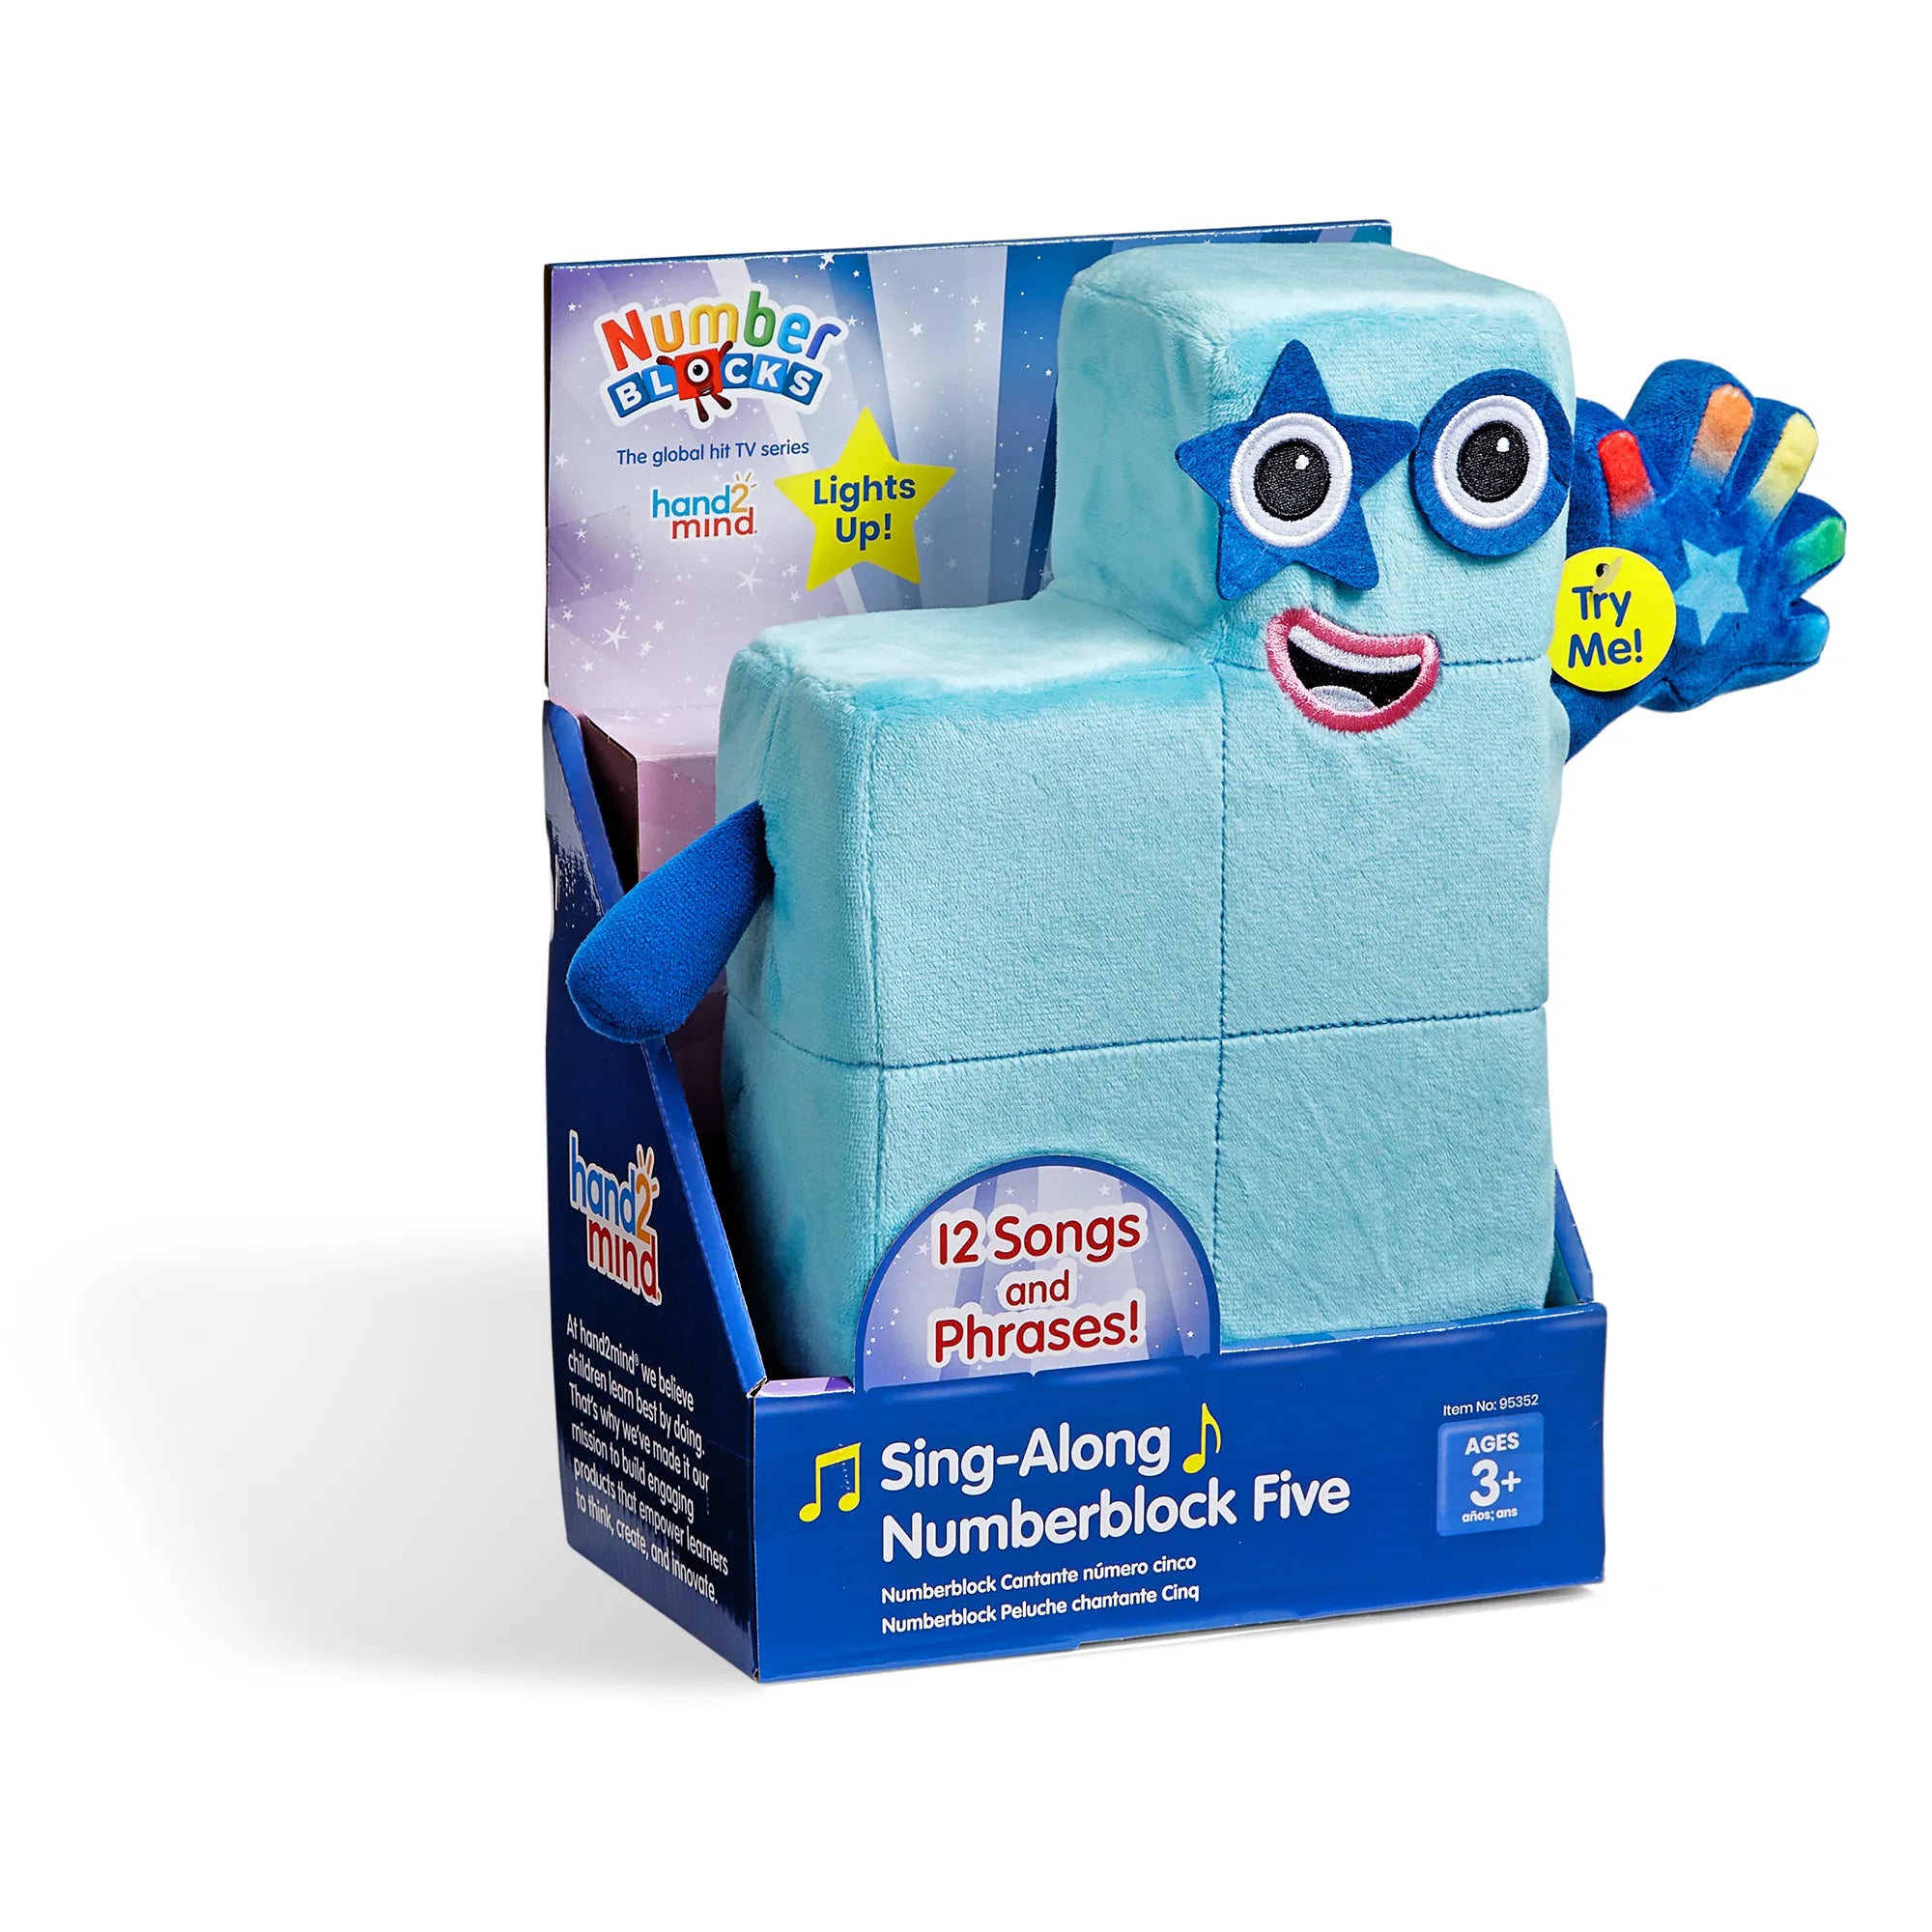 The Sing-Along Numberblock Five